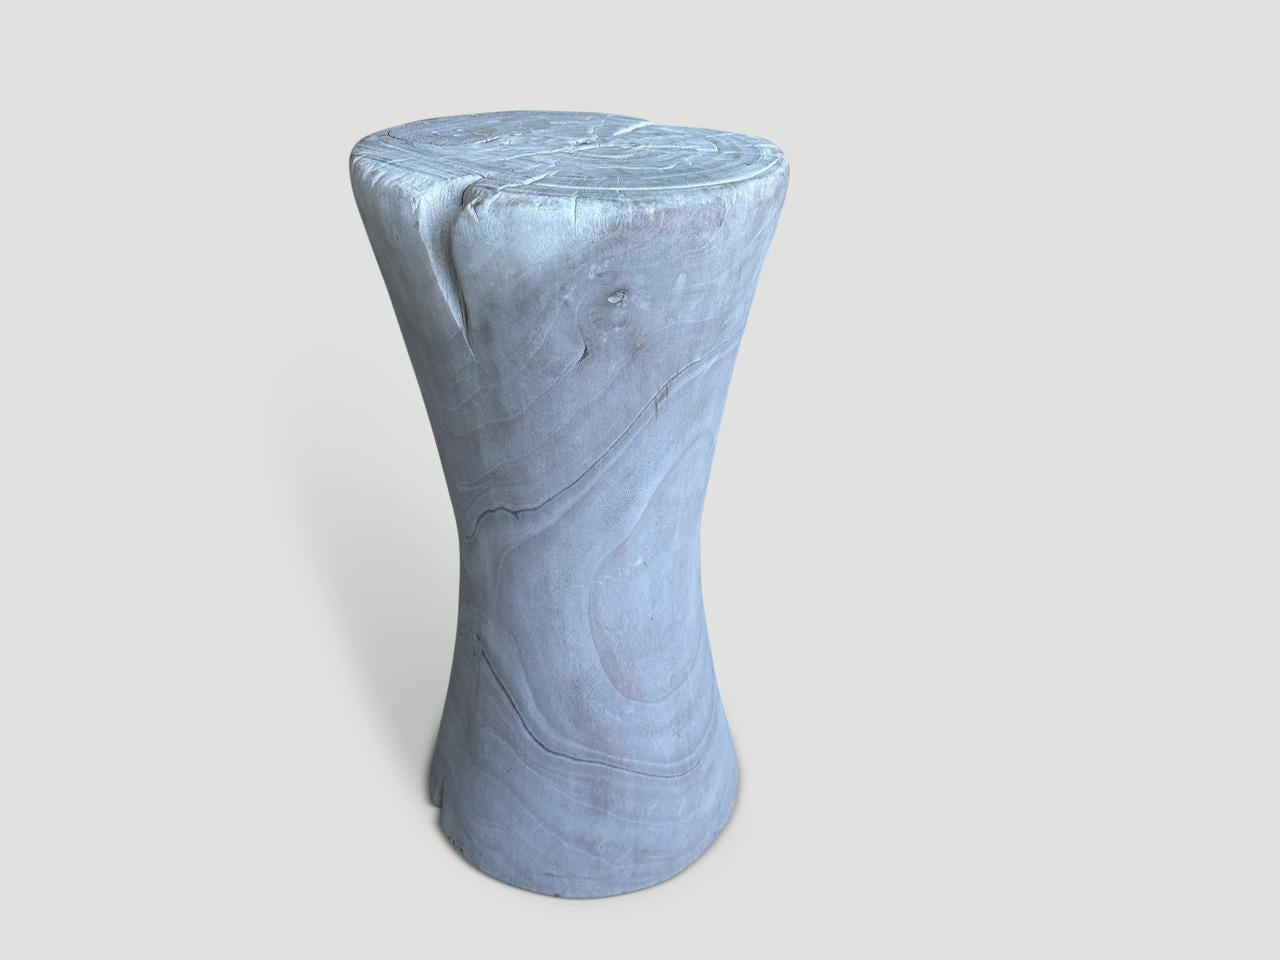 Sculptural hourglass side table or stool. Bleached and then finished with a light white wash revealing the beautiful grain on this century old teak wood. It’s all in the details. Pair available. The price and images reflect the one shown.

The St.